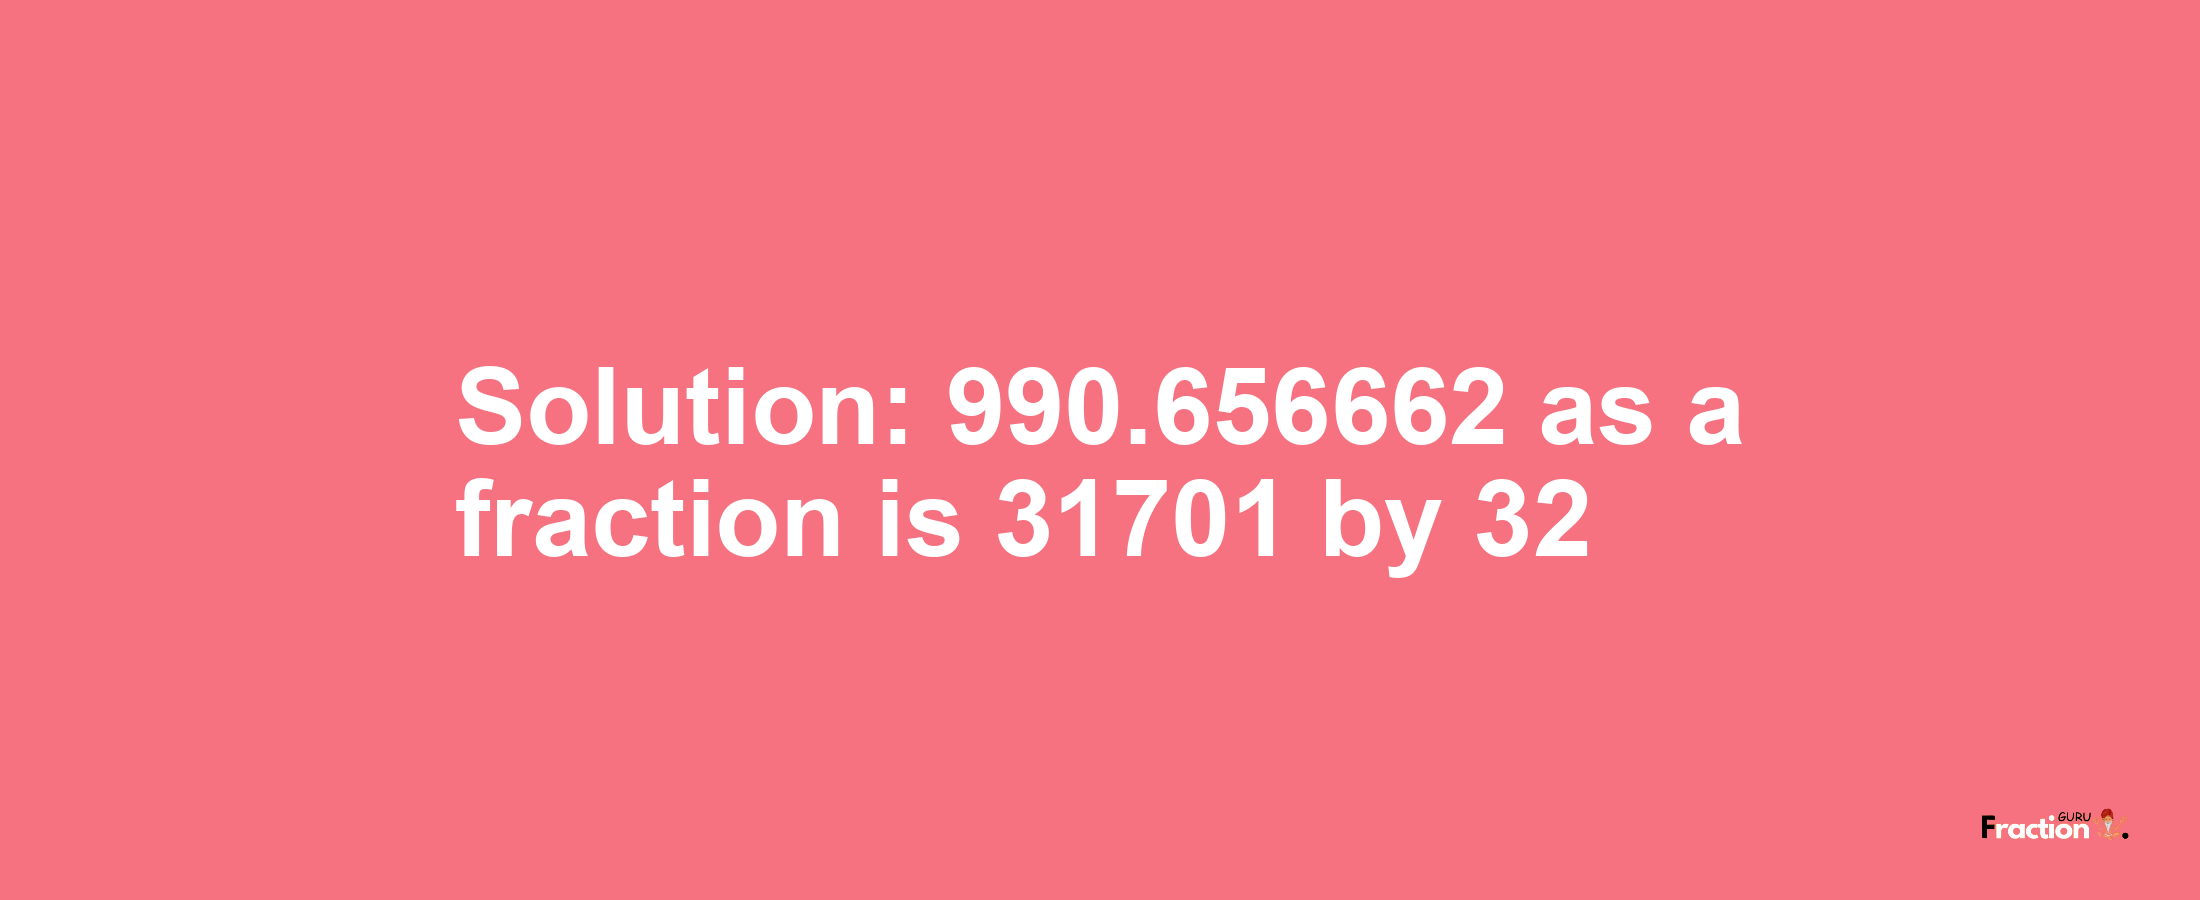 Solution:990.656662 as a fraction is 31701/32